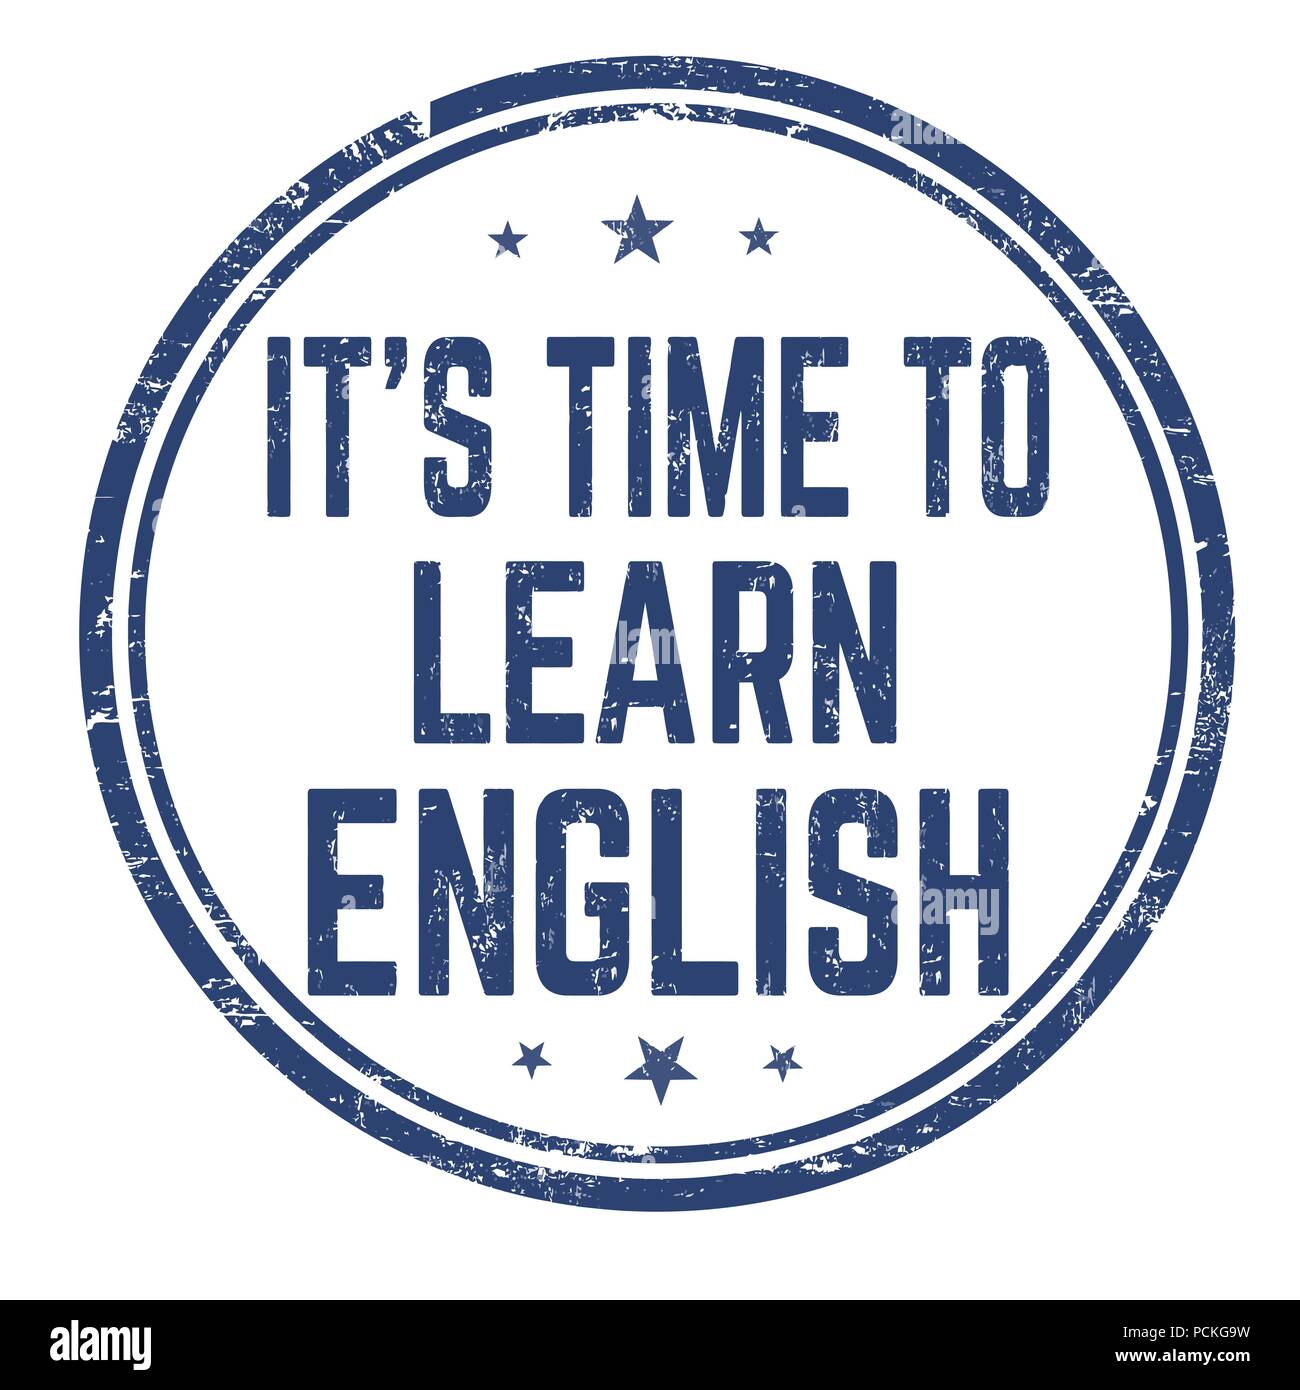 We speak english very well. Learn English. Its time to learn English. Its time to learn English картинки. Штамп learn English.